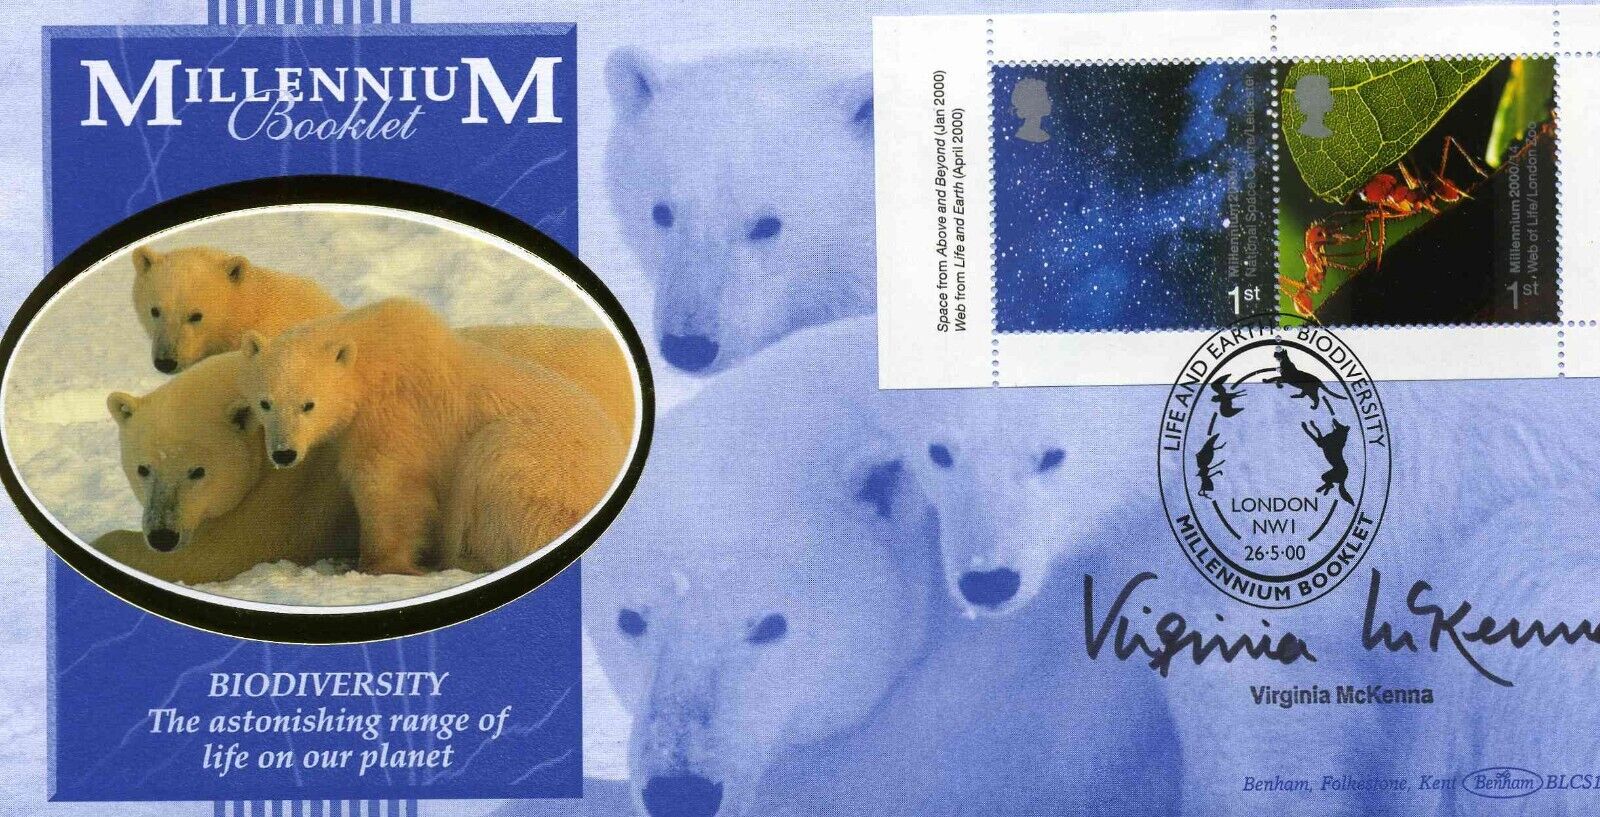 BIODIVERSITY First Day Cover 2000 CERTIFIED SIGNED VIRGINIA McKENNA